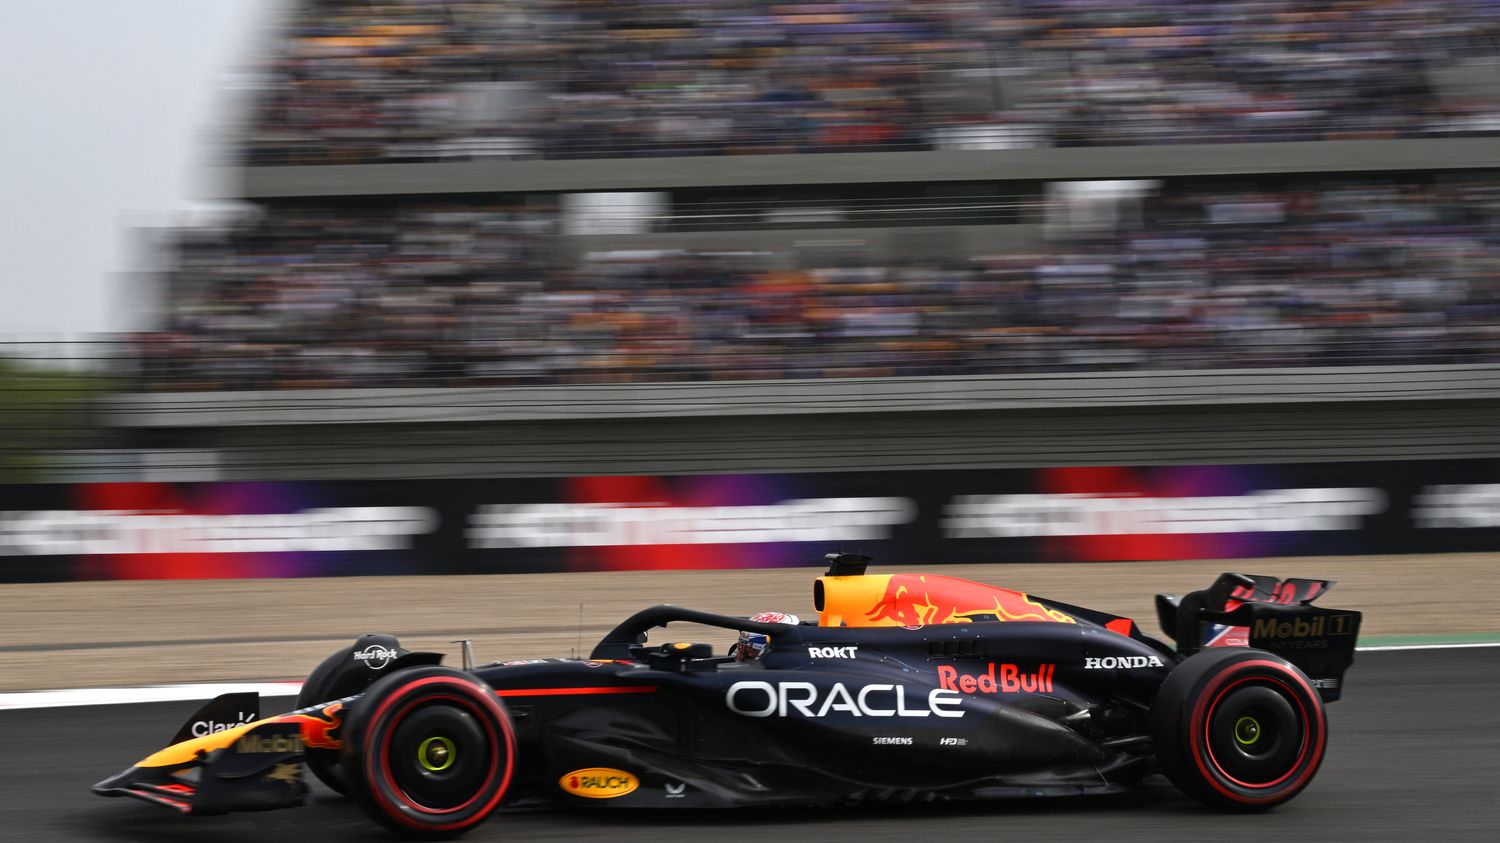 F1: Max Verstappen will start from pole position for the Chinese Grand Prix